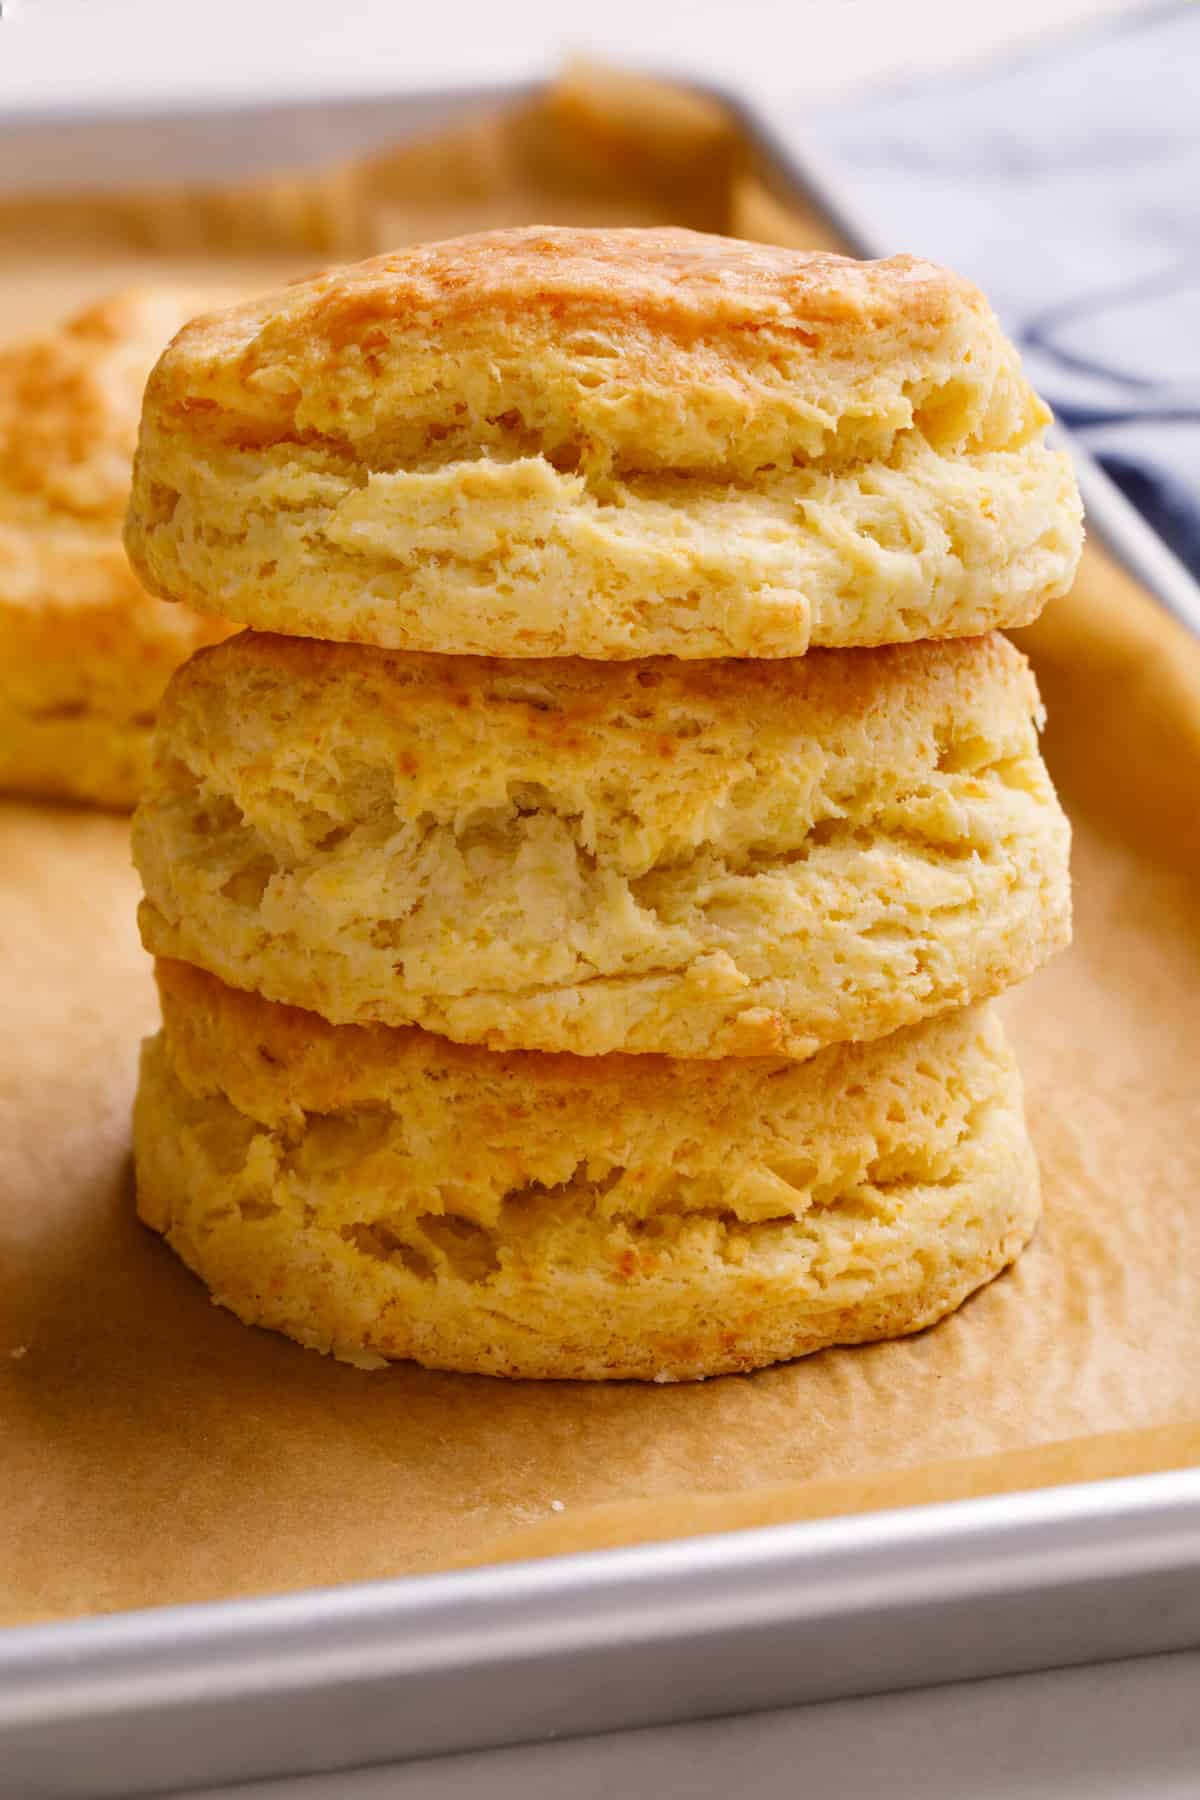 Close-up image of a stack of three homemade Popeyes biscuits sitting on a parchment lined baking tray.